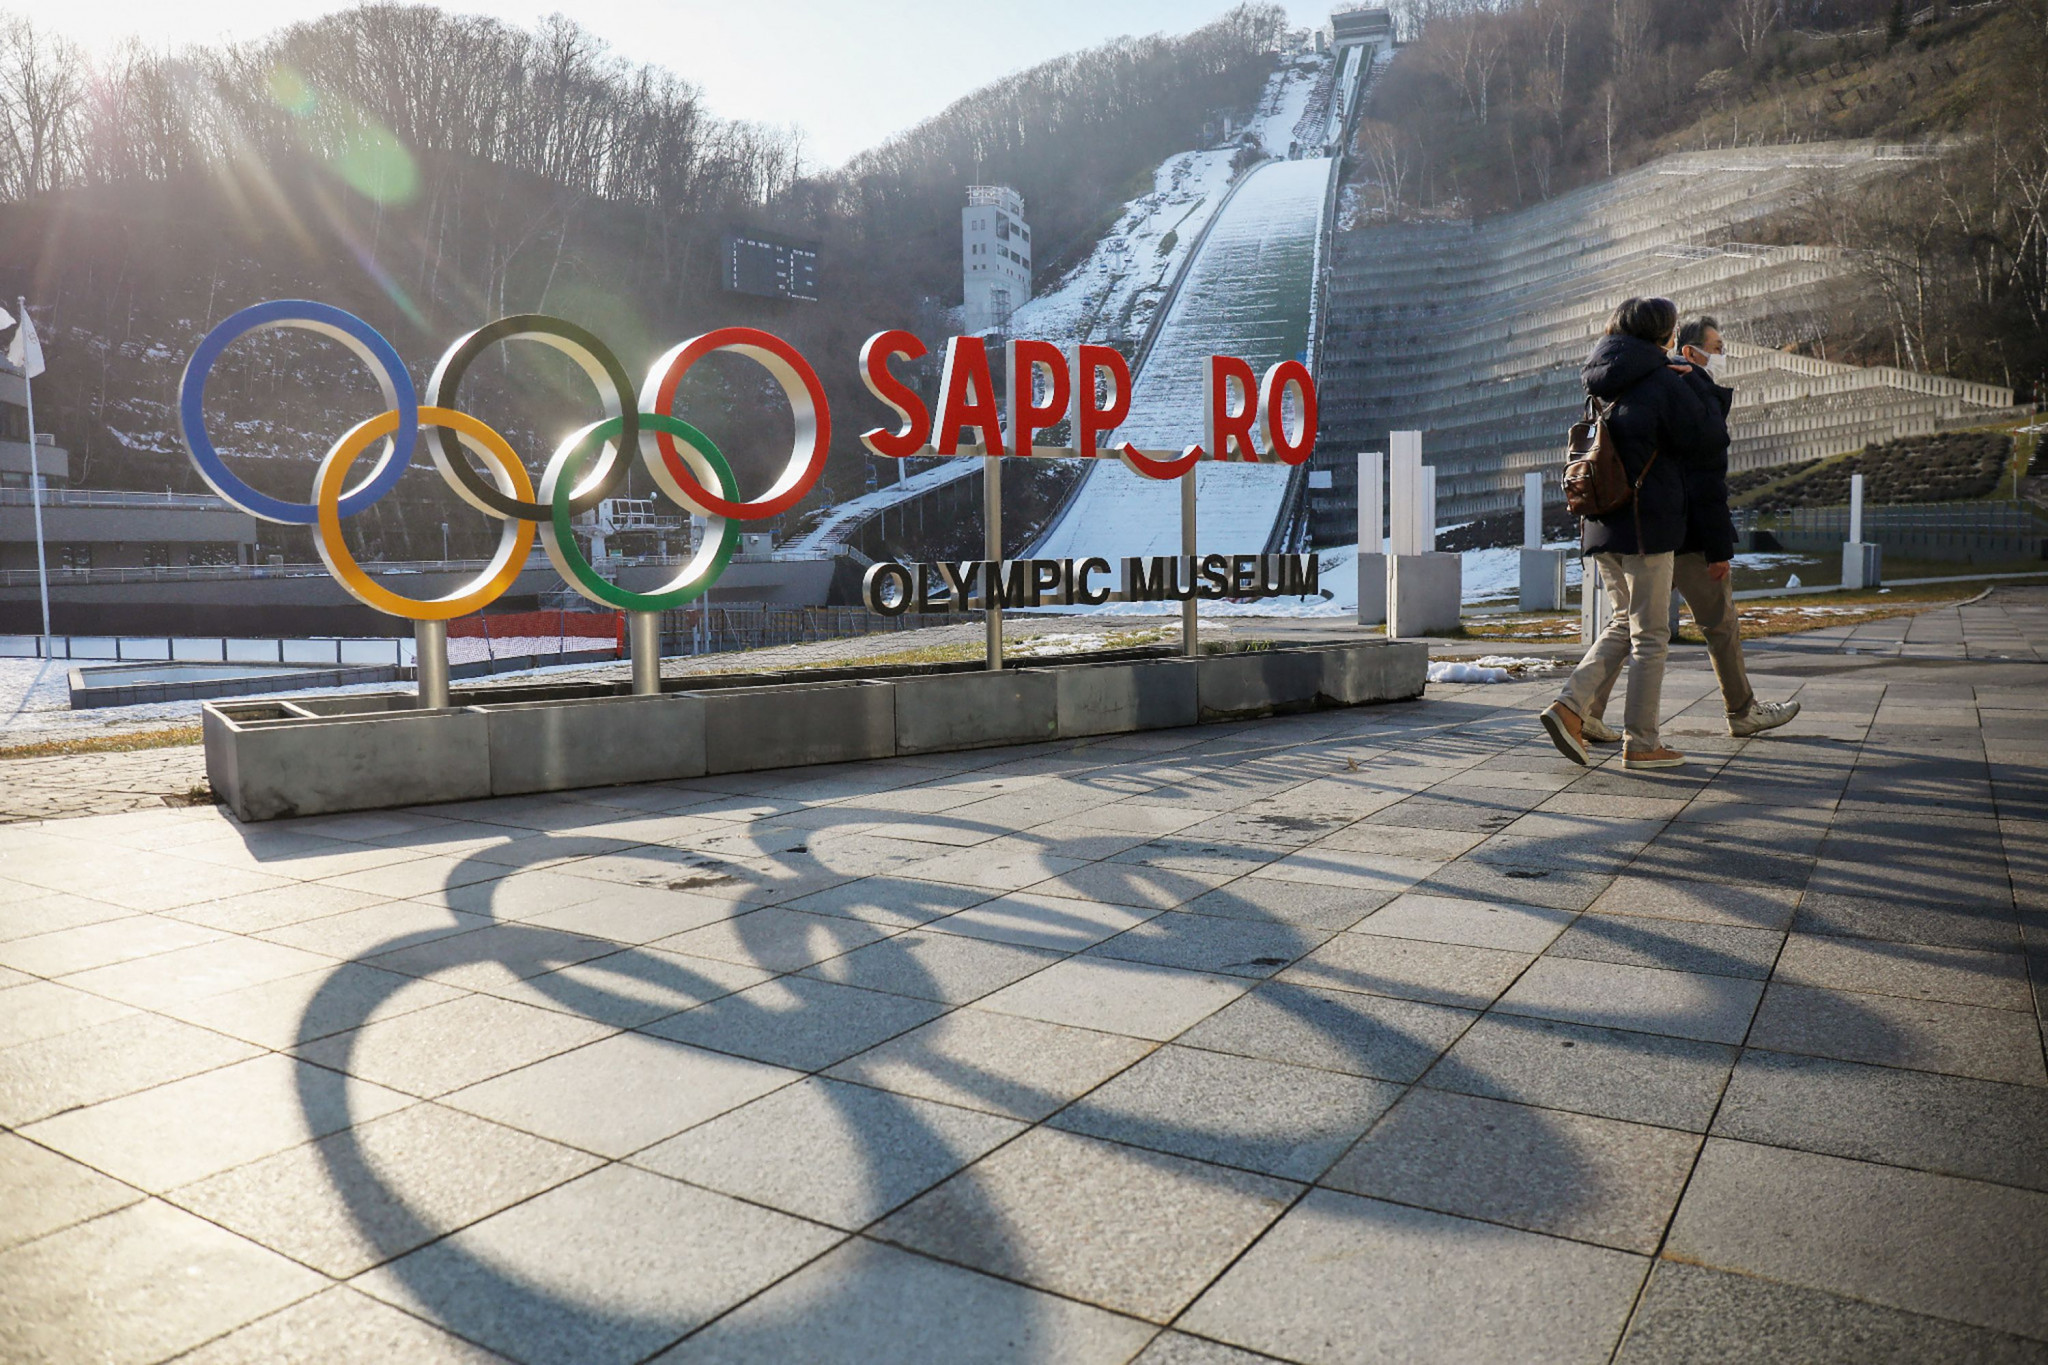 Sapporo tour held to inspect facilities for 2030 Winter Olympics bid